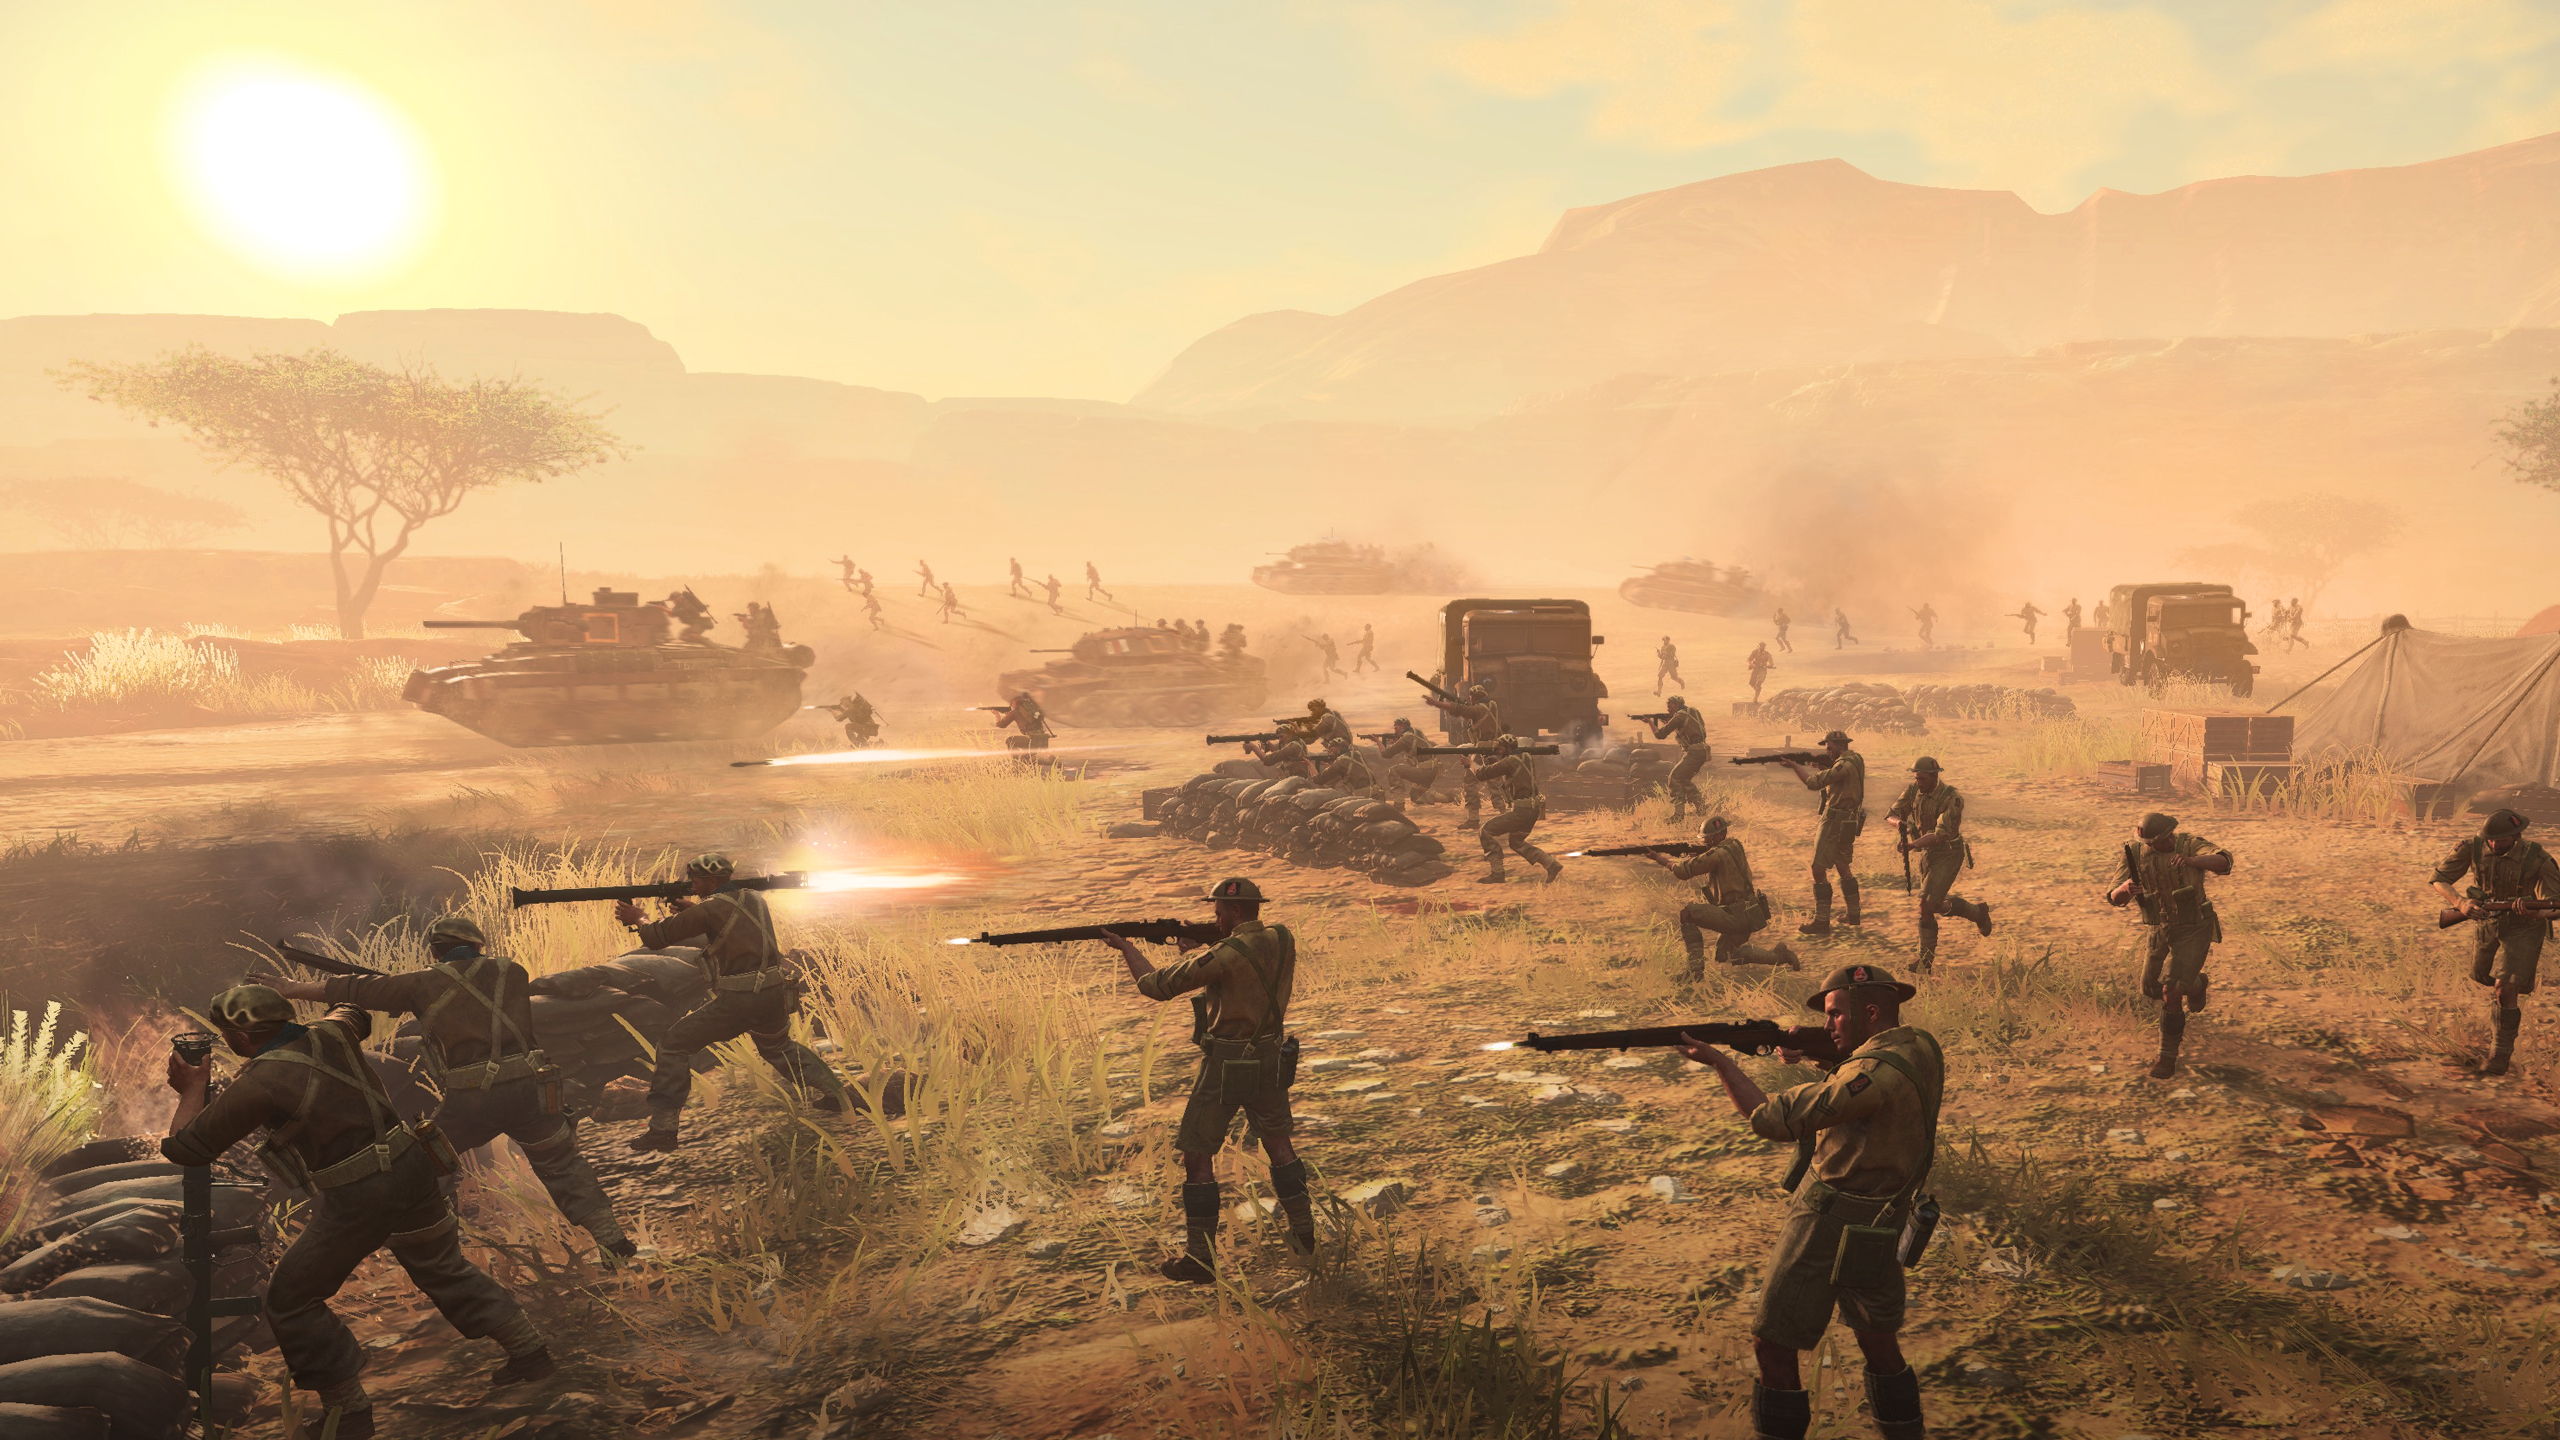 Company of Heroes 3 soldiers fighting in a yellow haze